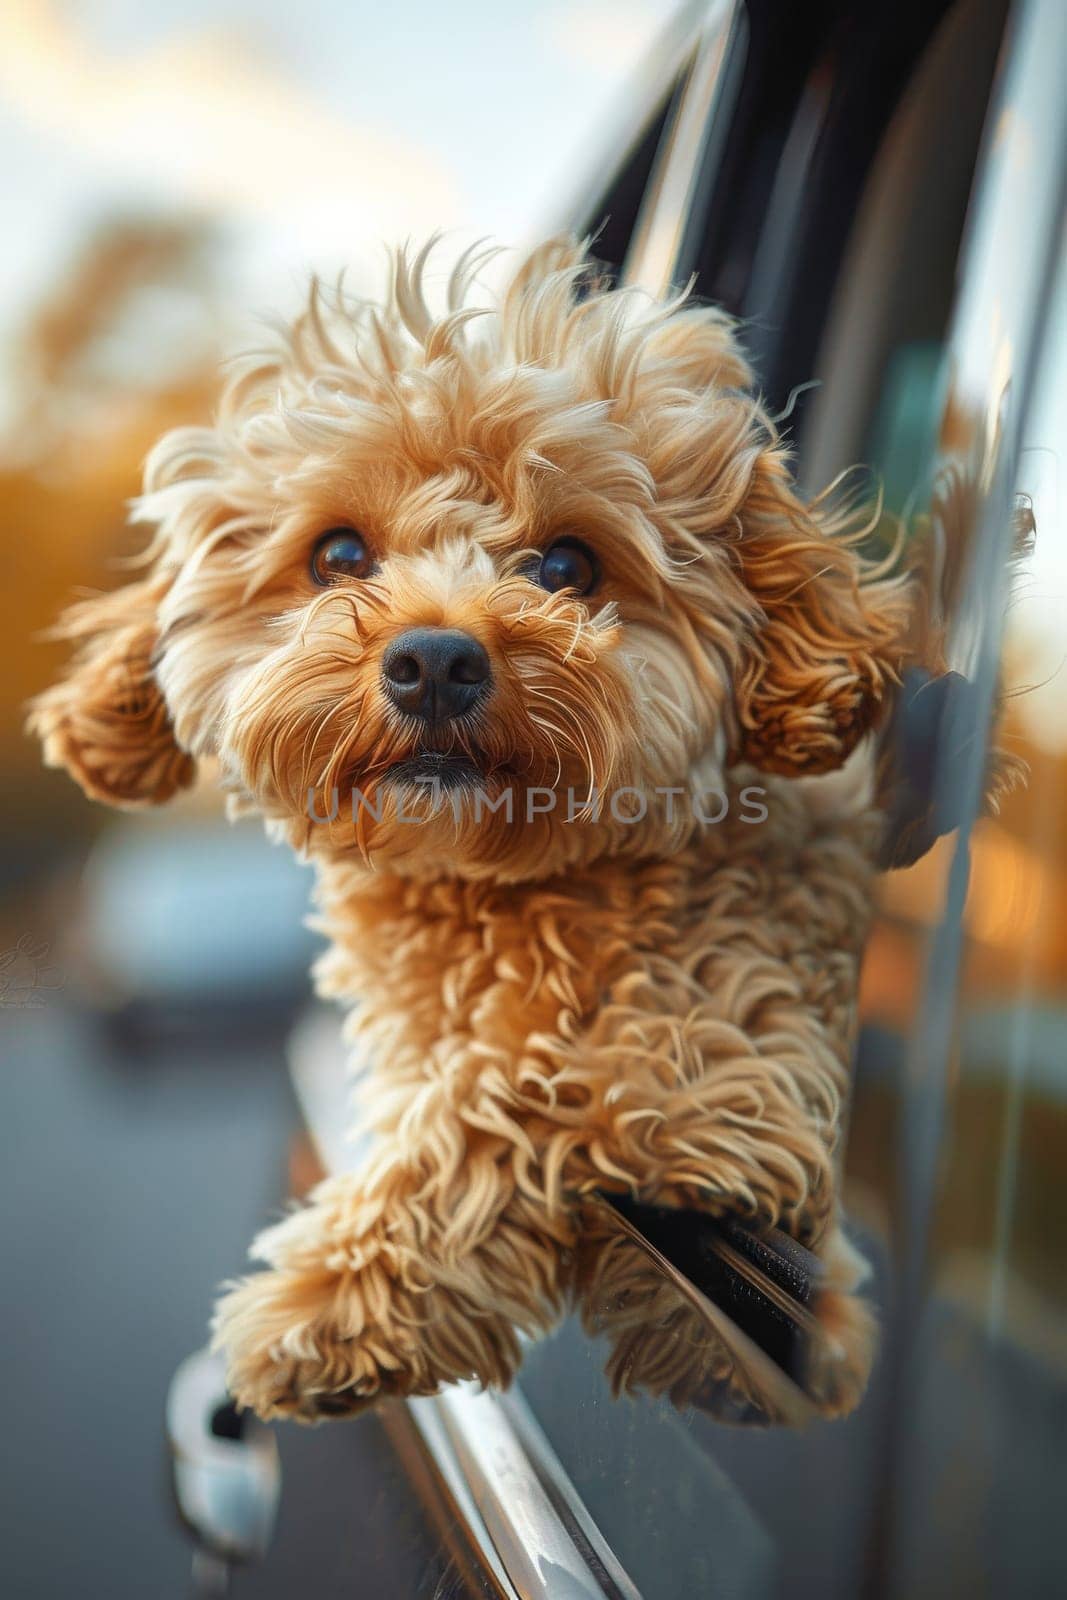 A small dog with a fluffy coat is sitting in a car window. The dog is looking out the window and he is enjoying the view